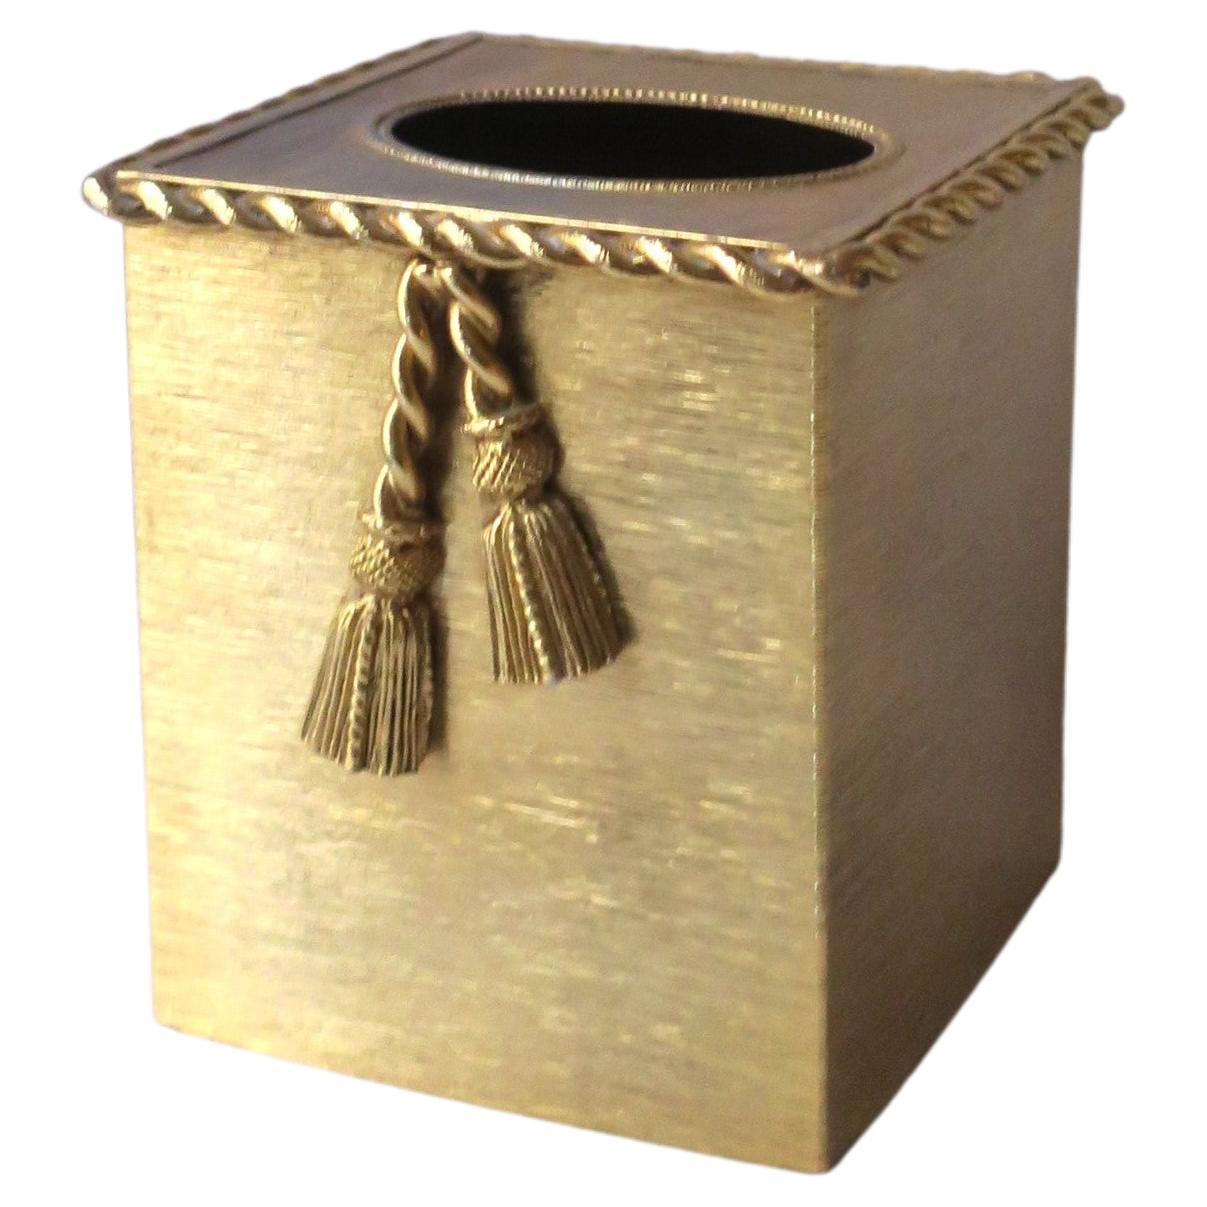 Gold Tissue Box Cover with Rope and Tassel Design